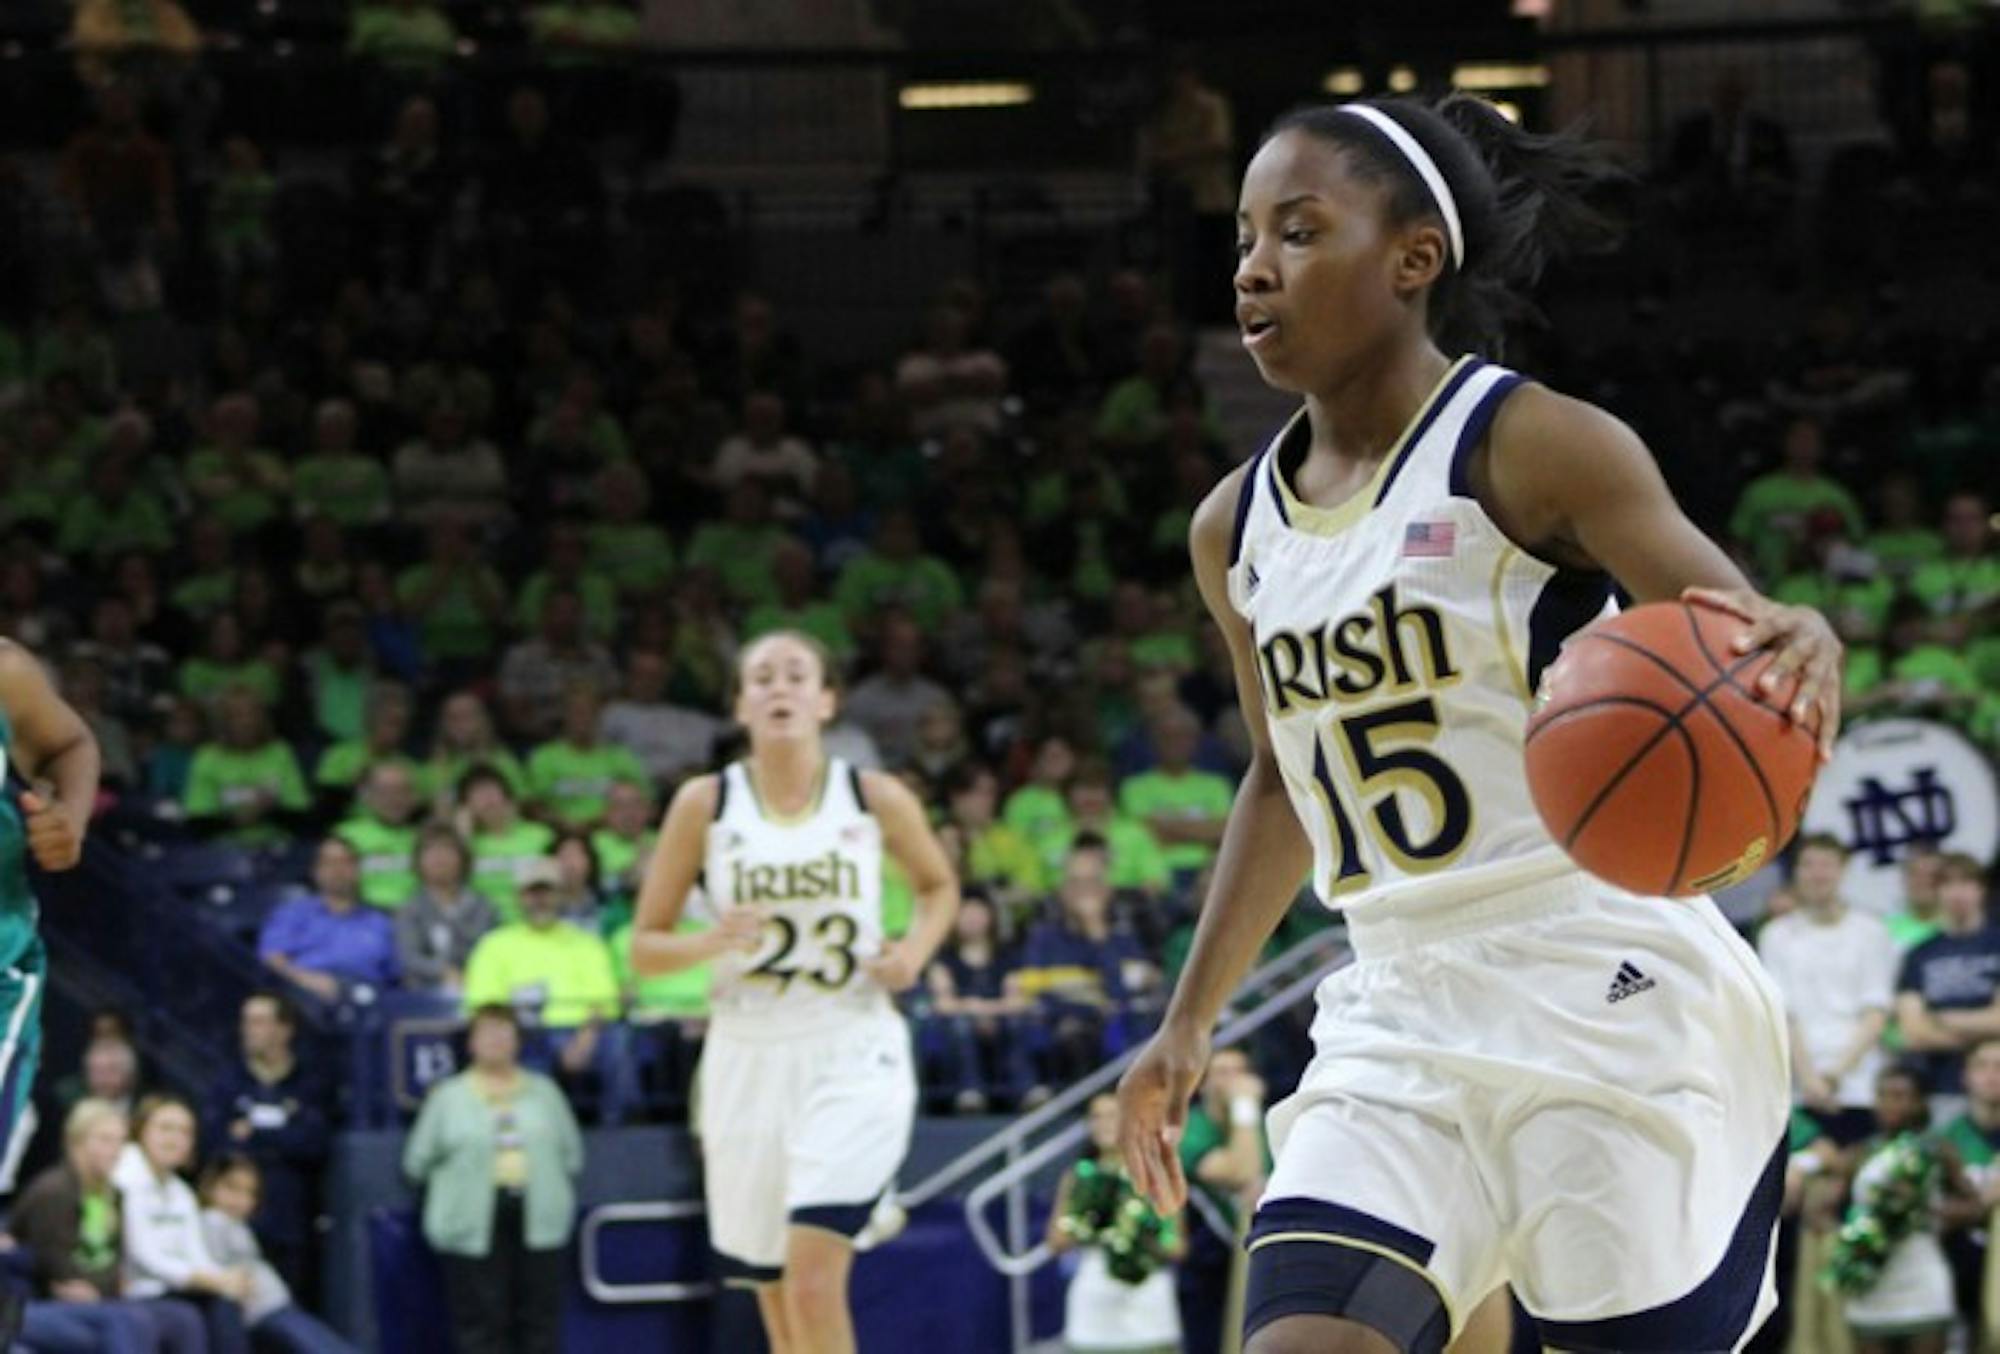 Irish freshman guard Lindsay Allen dribbles the ball during Notre Dame's 99-50 home win over UNC Wilmington on Jan. 26.